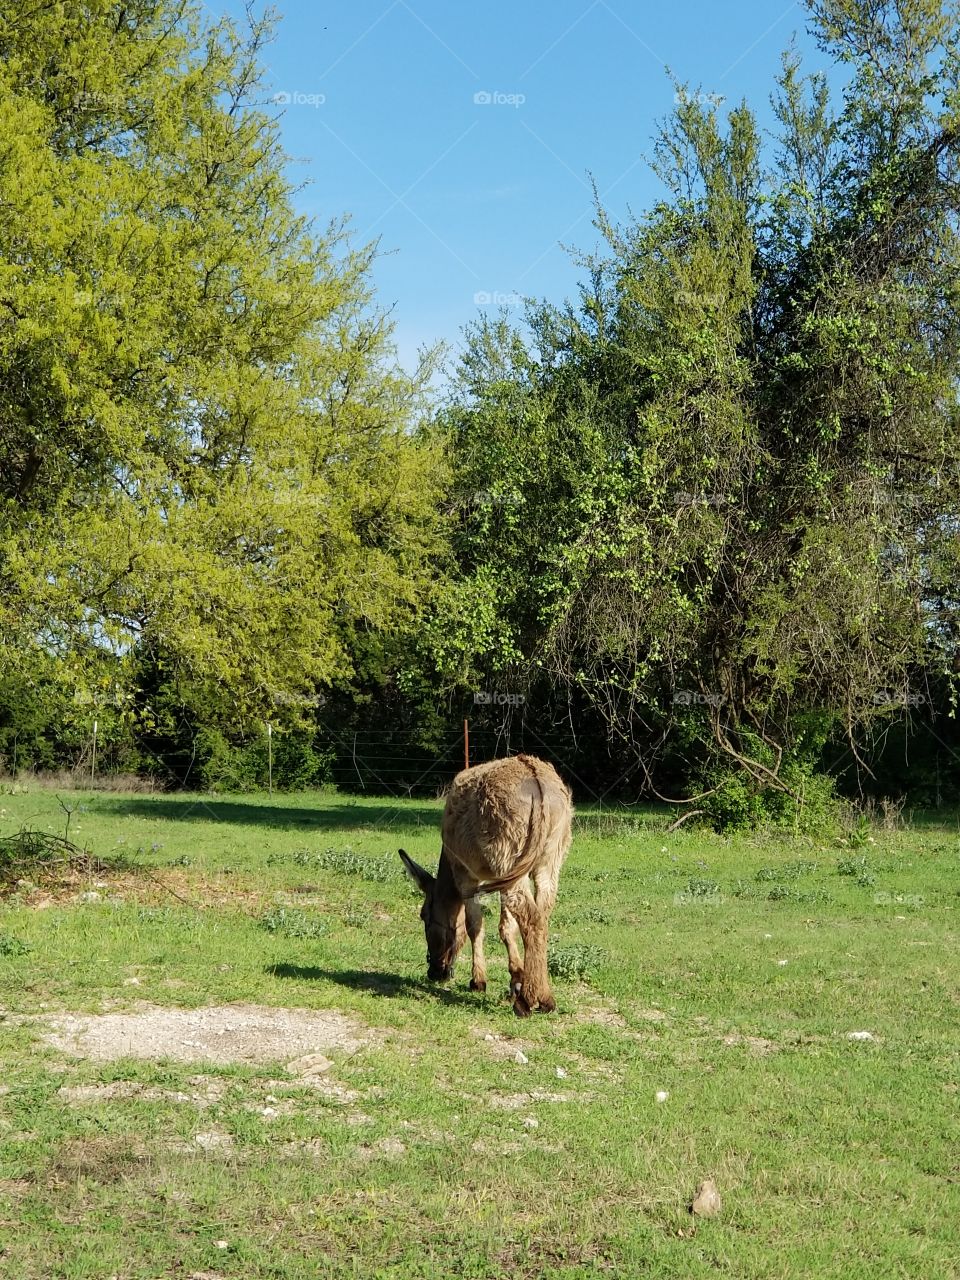 A donkey walks away from the camera at Belton Lake Outdoor Recreation Area, Texas.